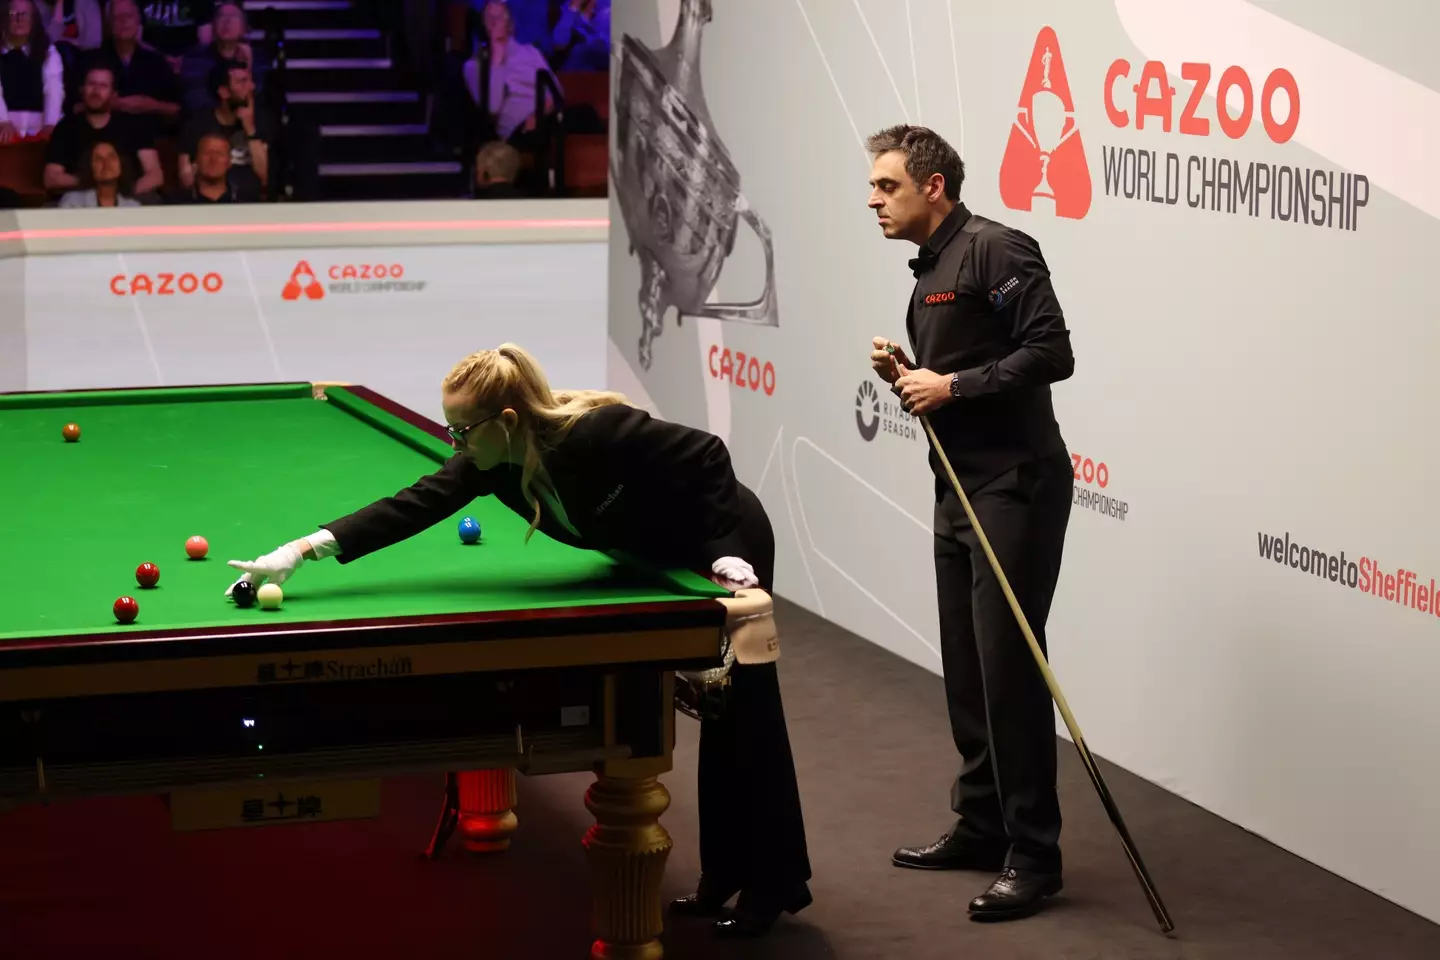 Ronnie O'Sullivan looks on as the referee re-spots the black ball. Image: Getty